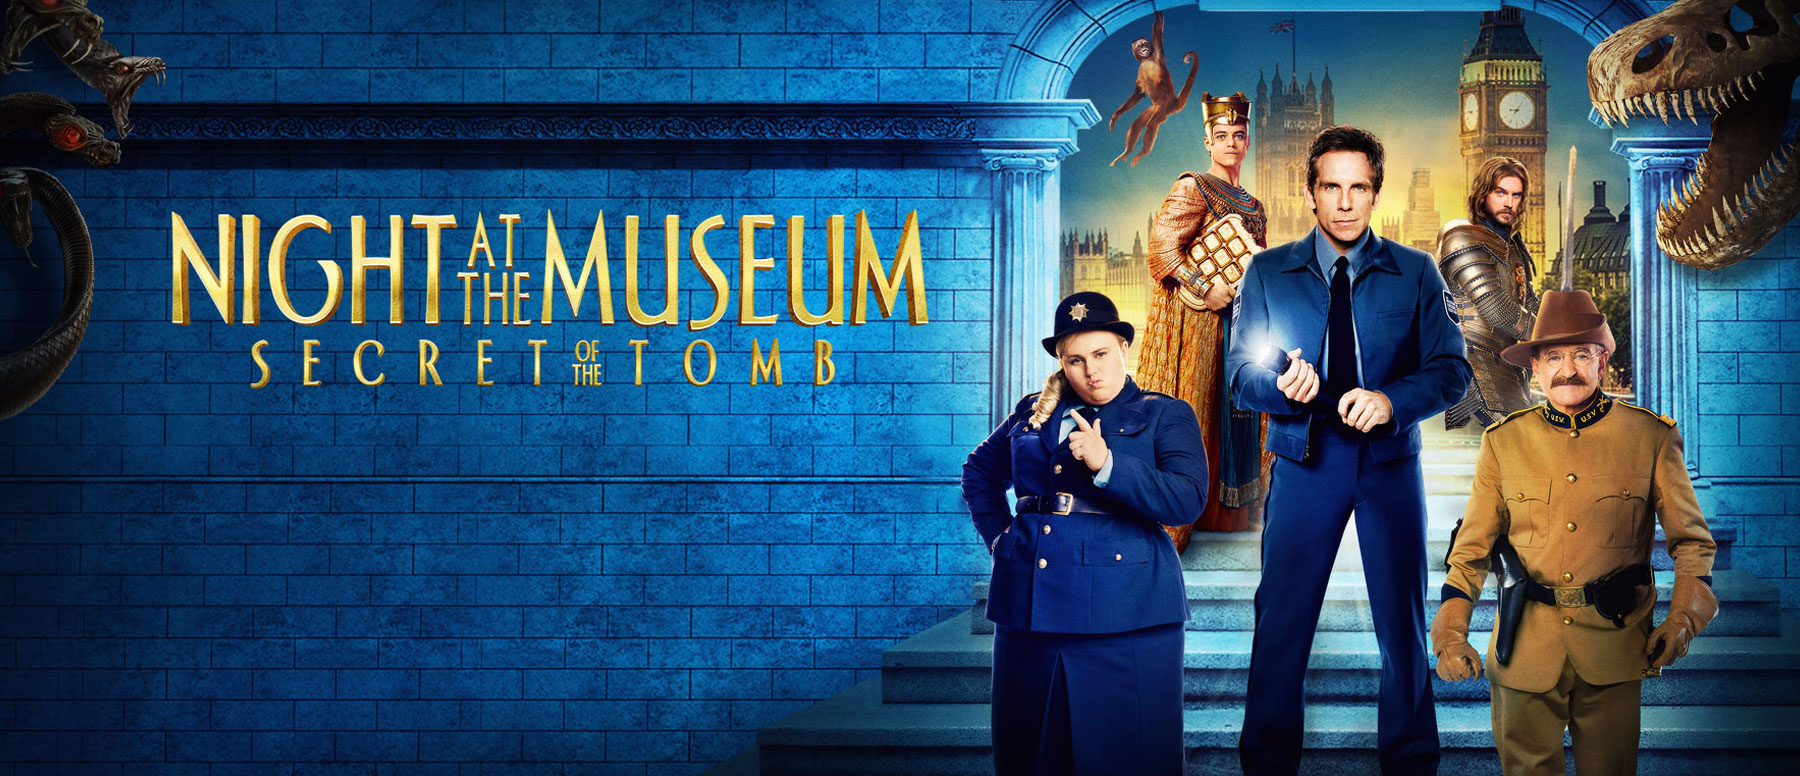 Night At The Museum 3 Hindi Dubbed